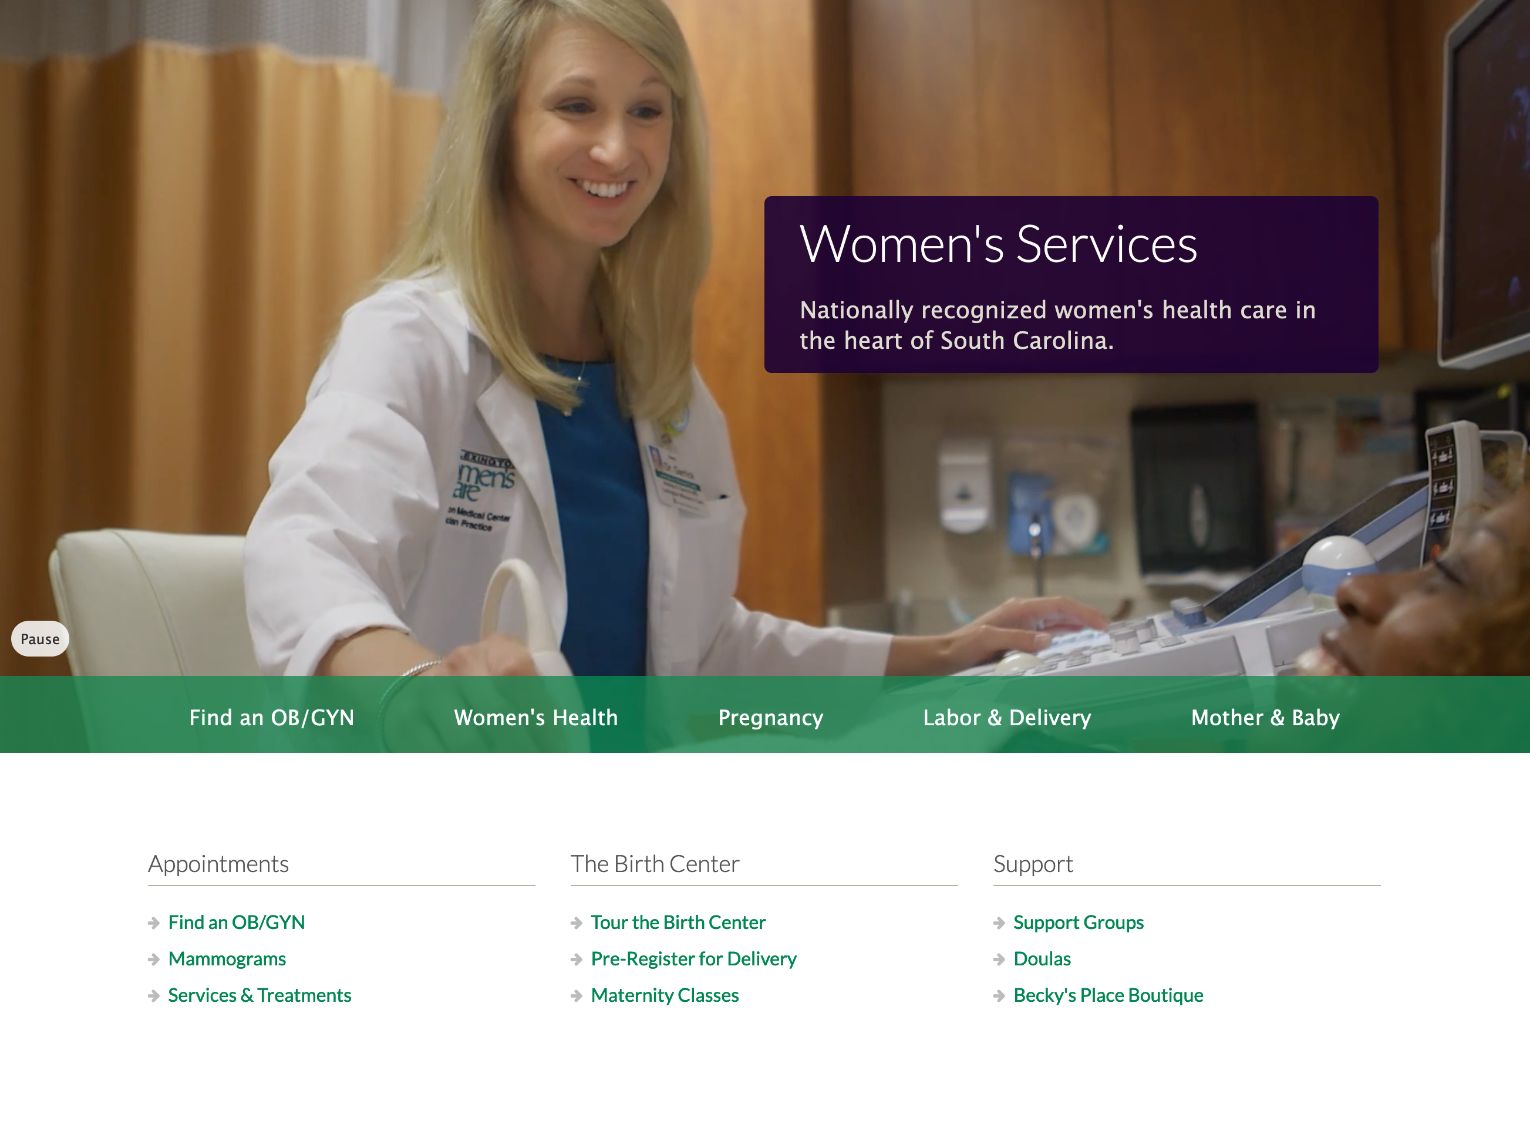 Women's Services landing page on lexmed.com, showing a hero video of a doctor performing a sonogram and strong horizontal navigation above quick links for Appointments, The Birth Center, and Support.